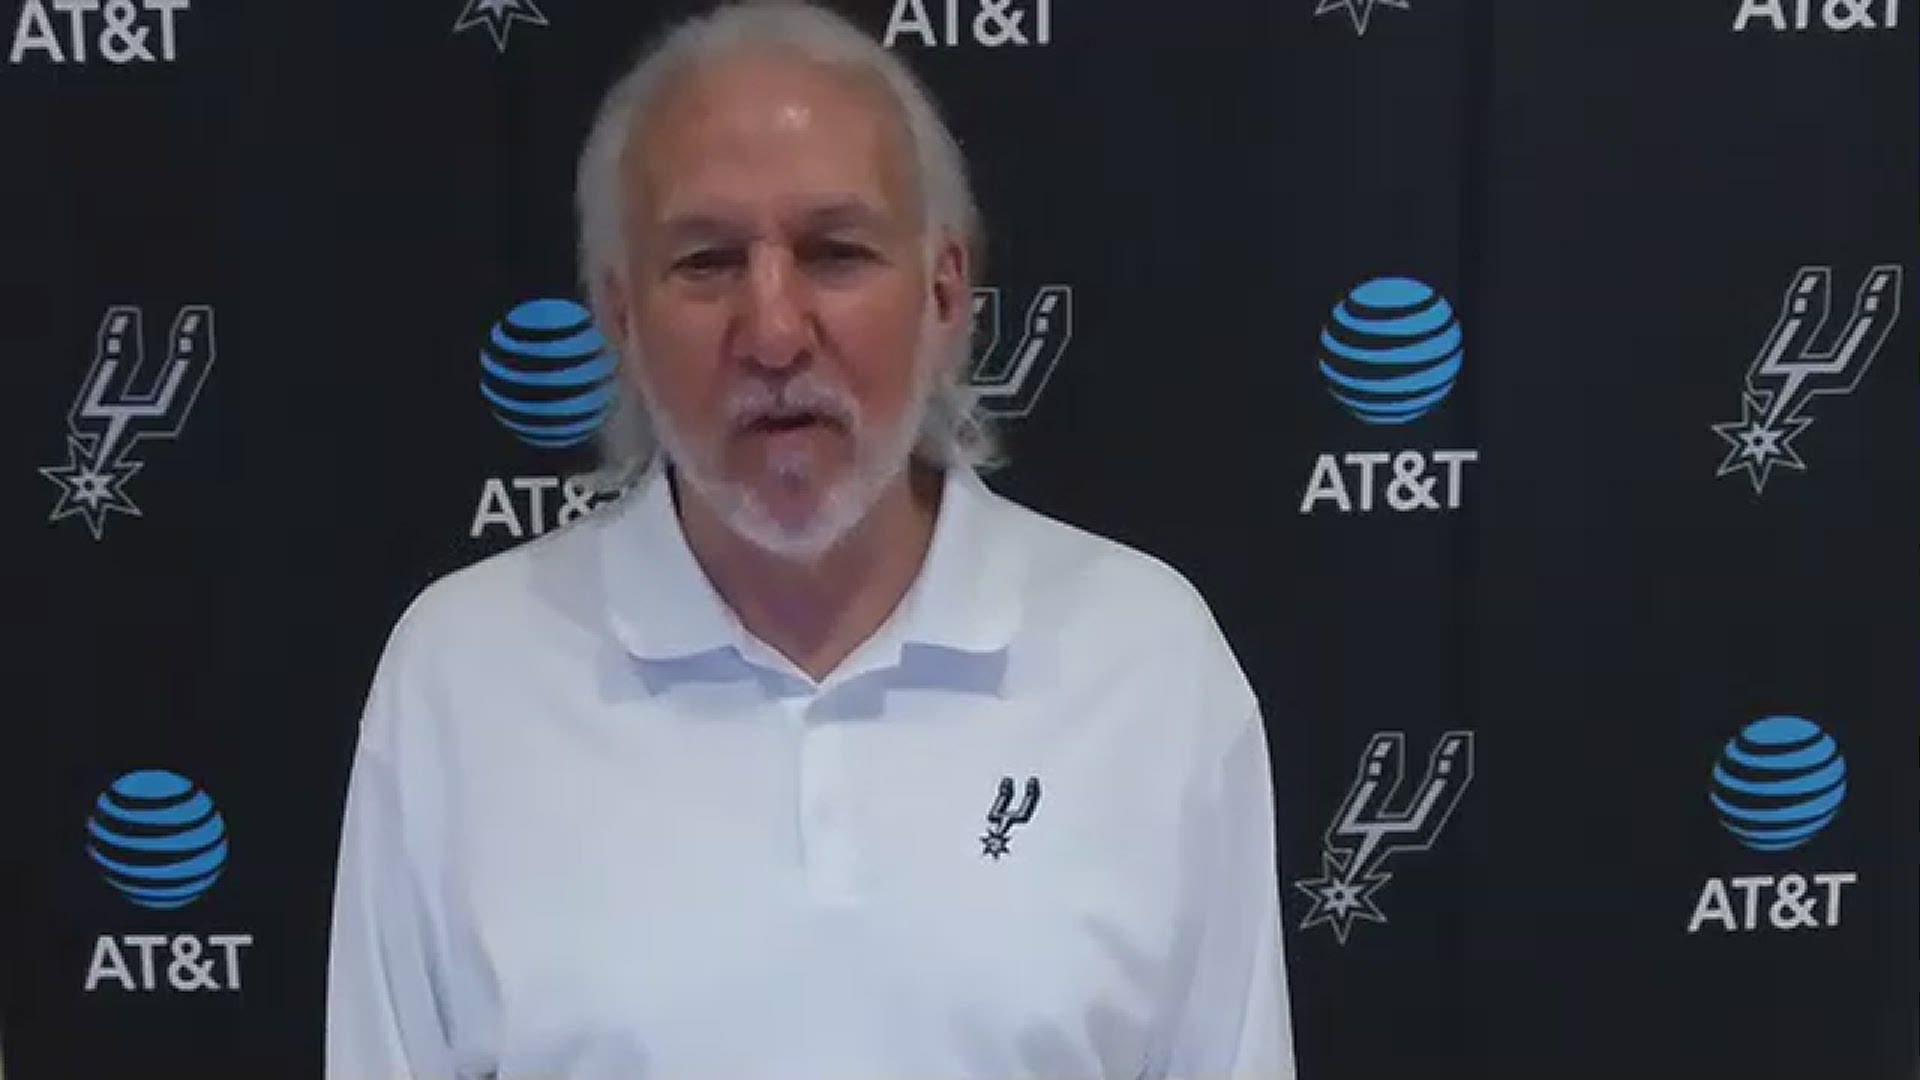 Popovich spoke about the Big Fundamental's skills, leadership abilities, bank shots, and Hall-of-Fame personality ahead of next week's induction.